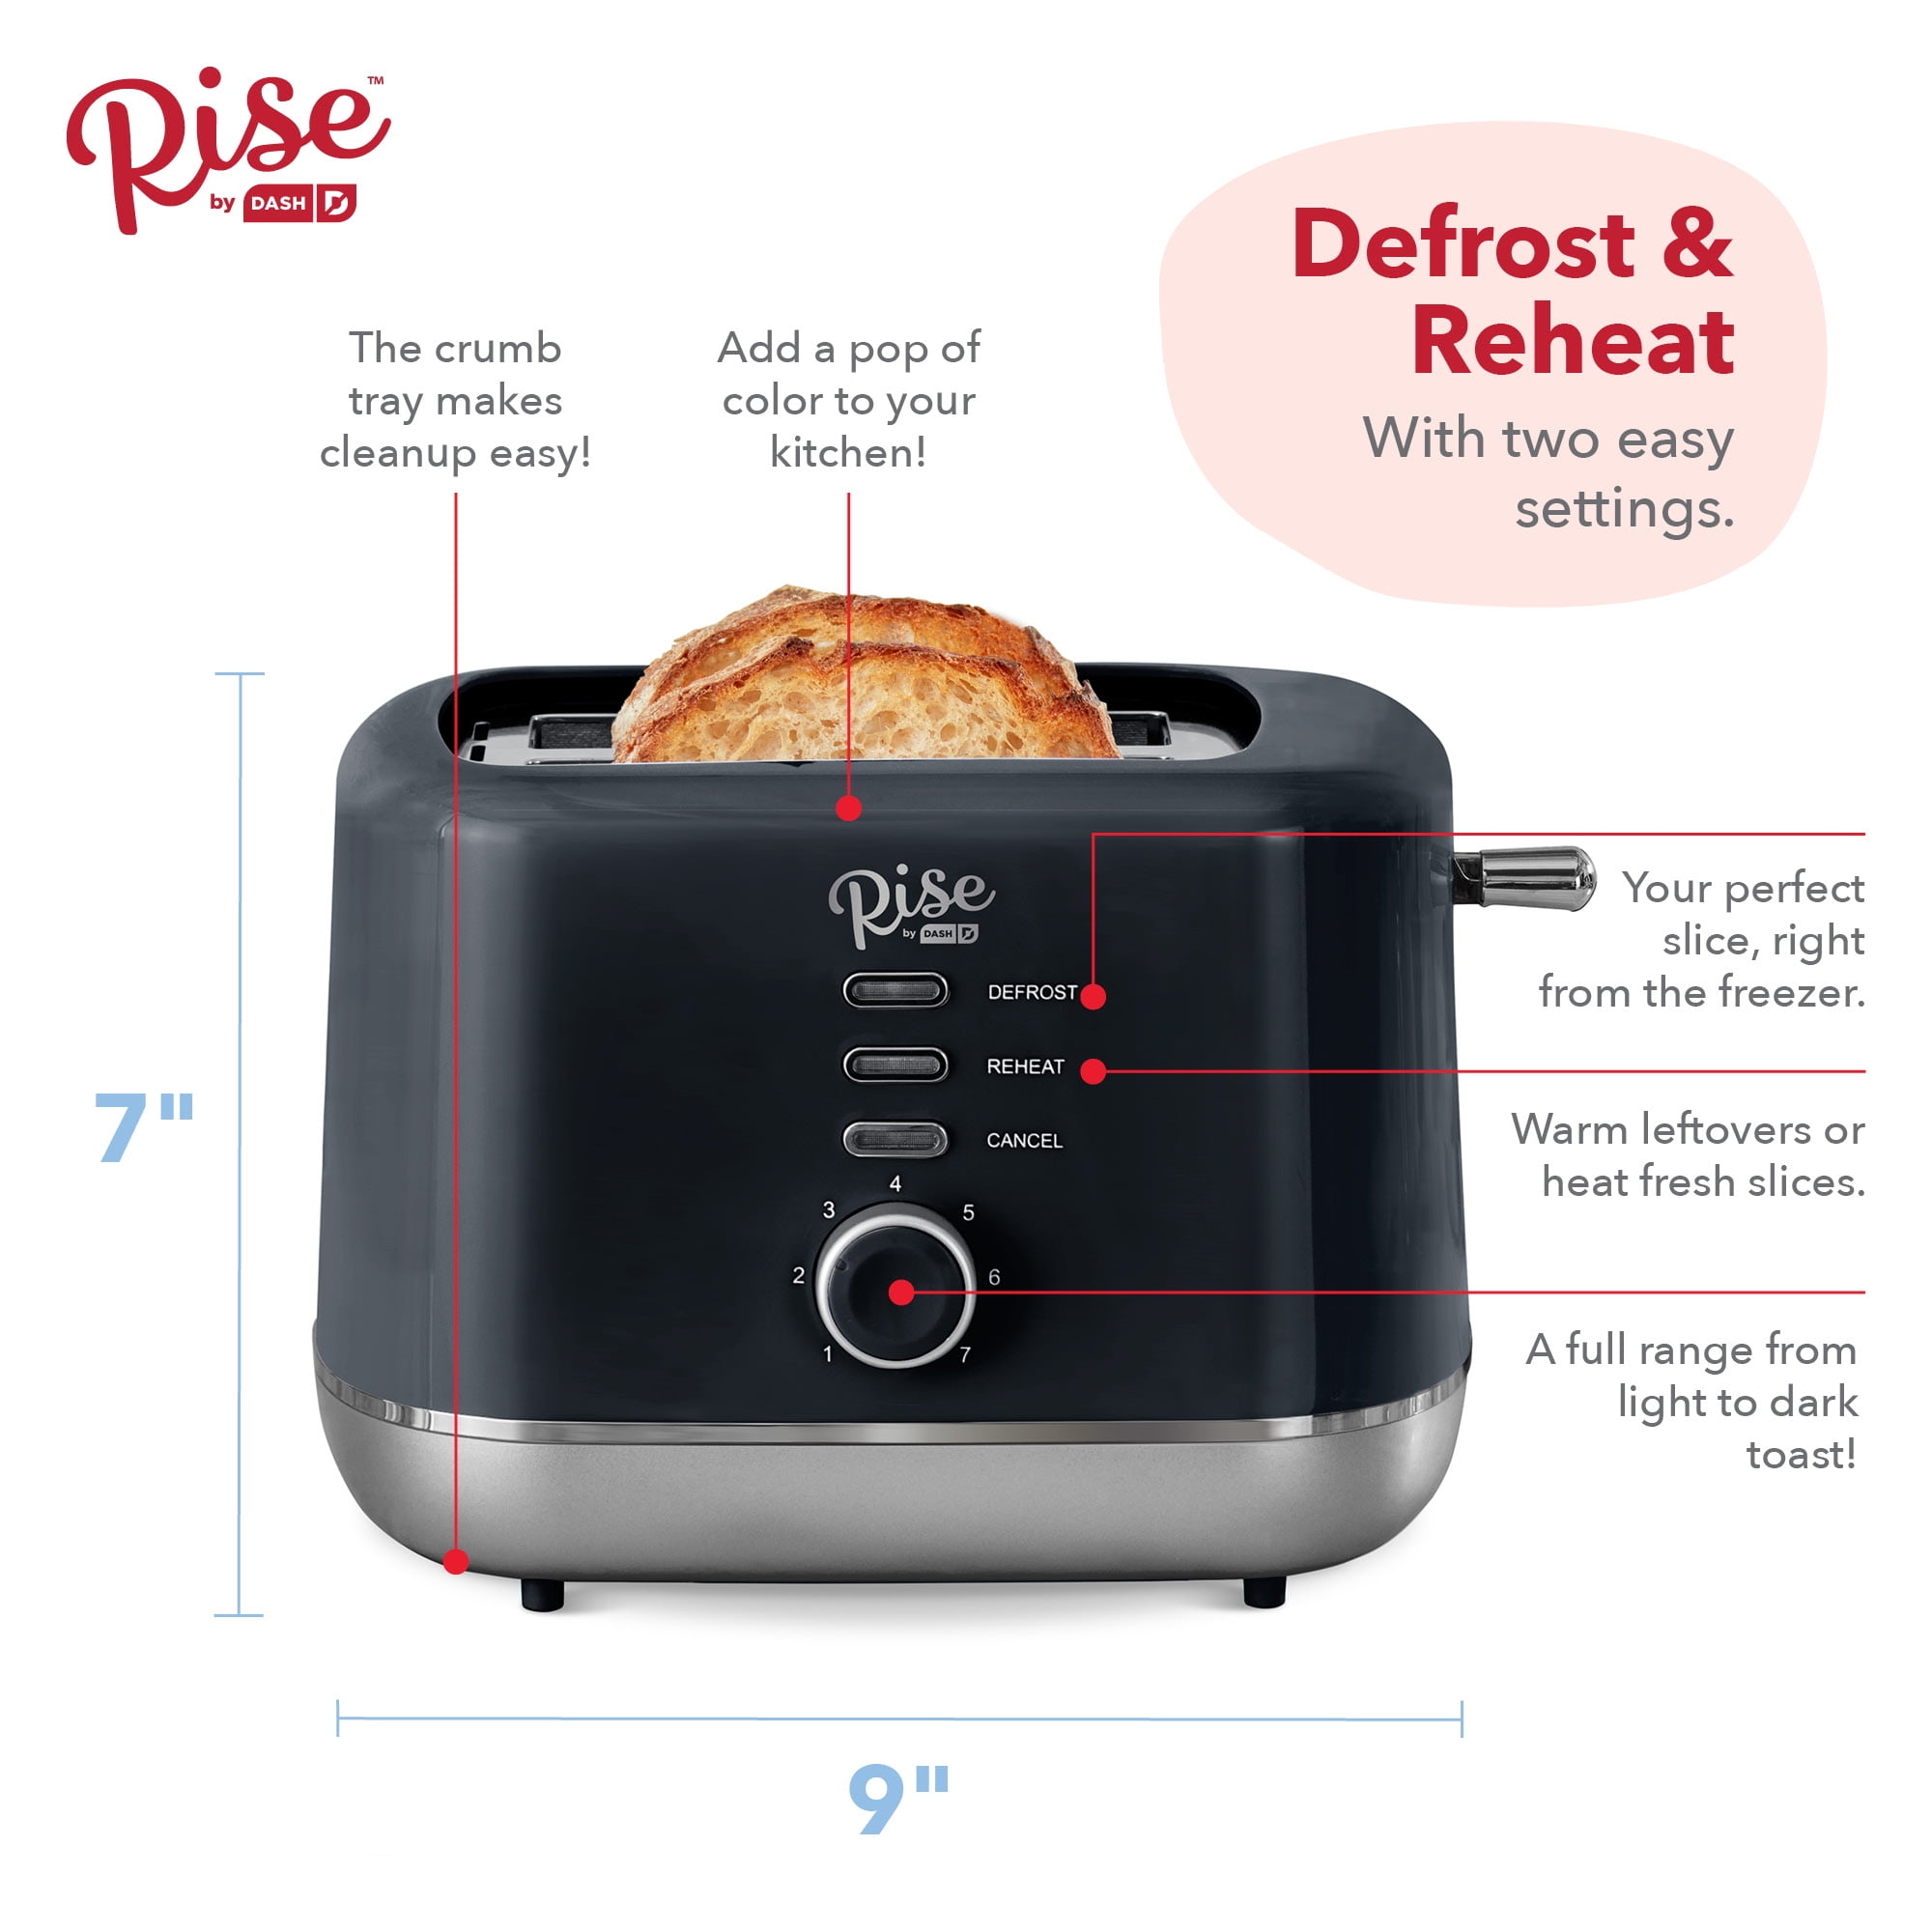 Rise by Dash 2-Slice Toaster - Kellogg Supply